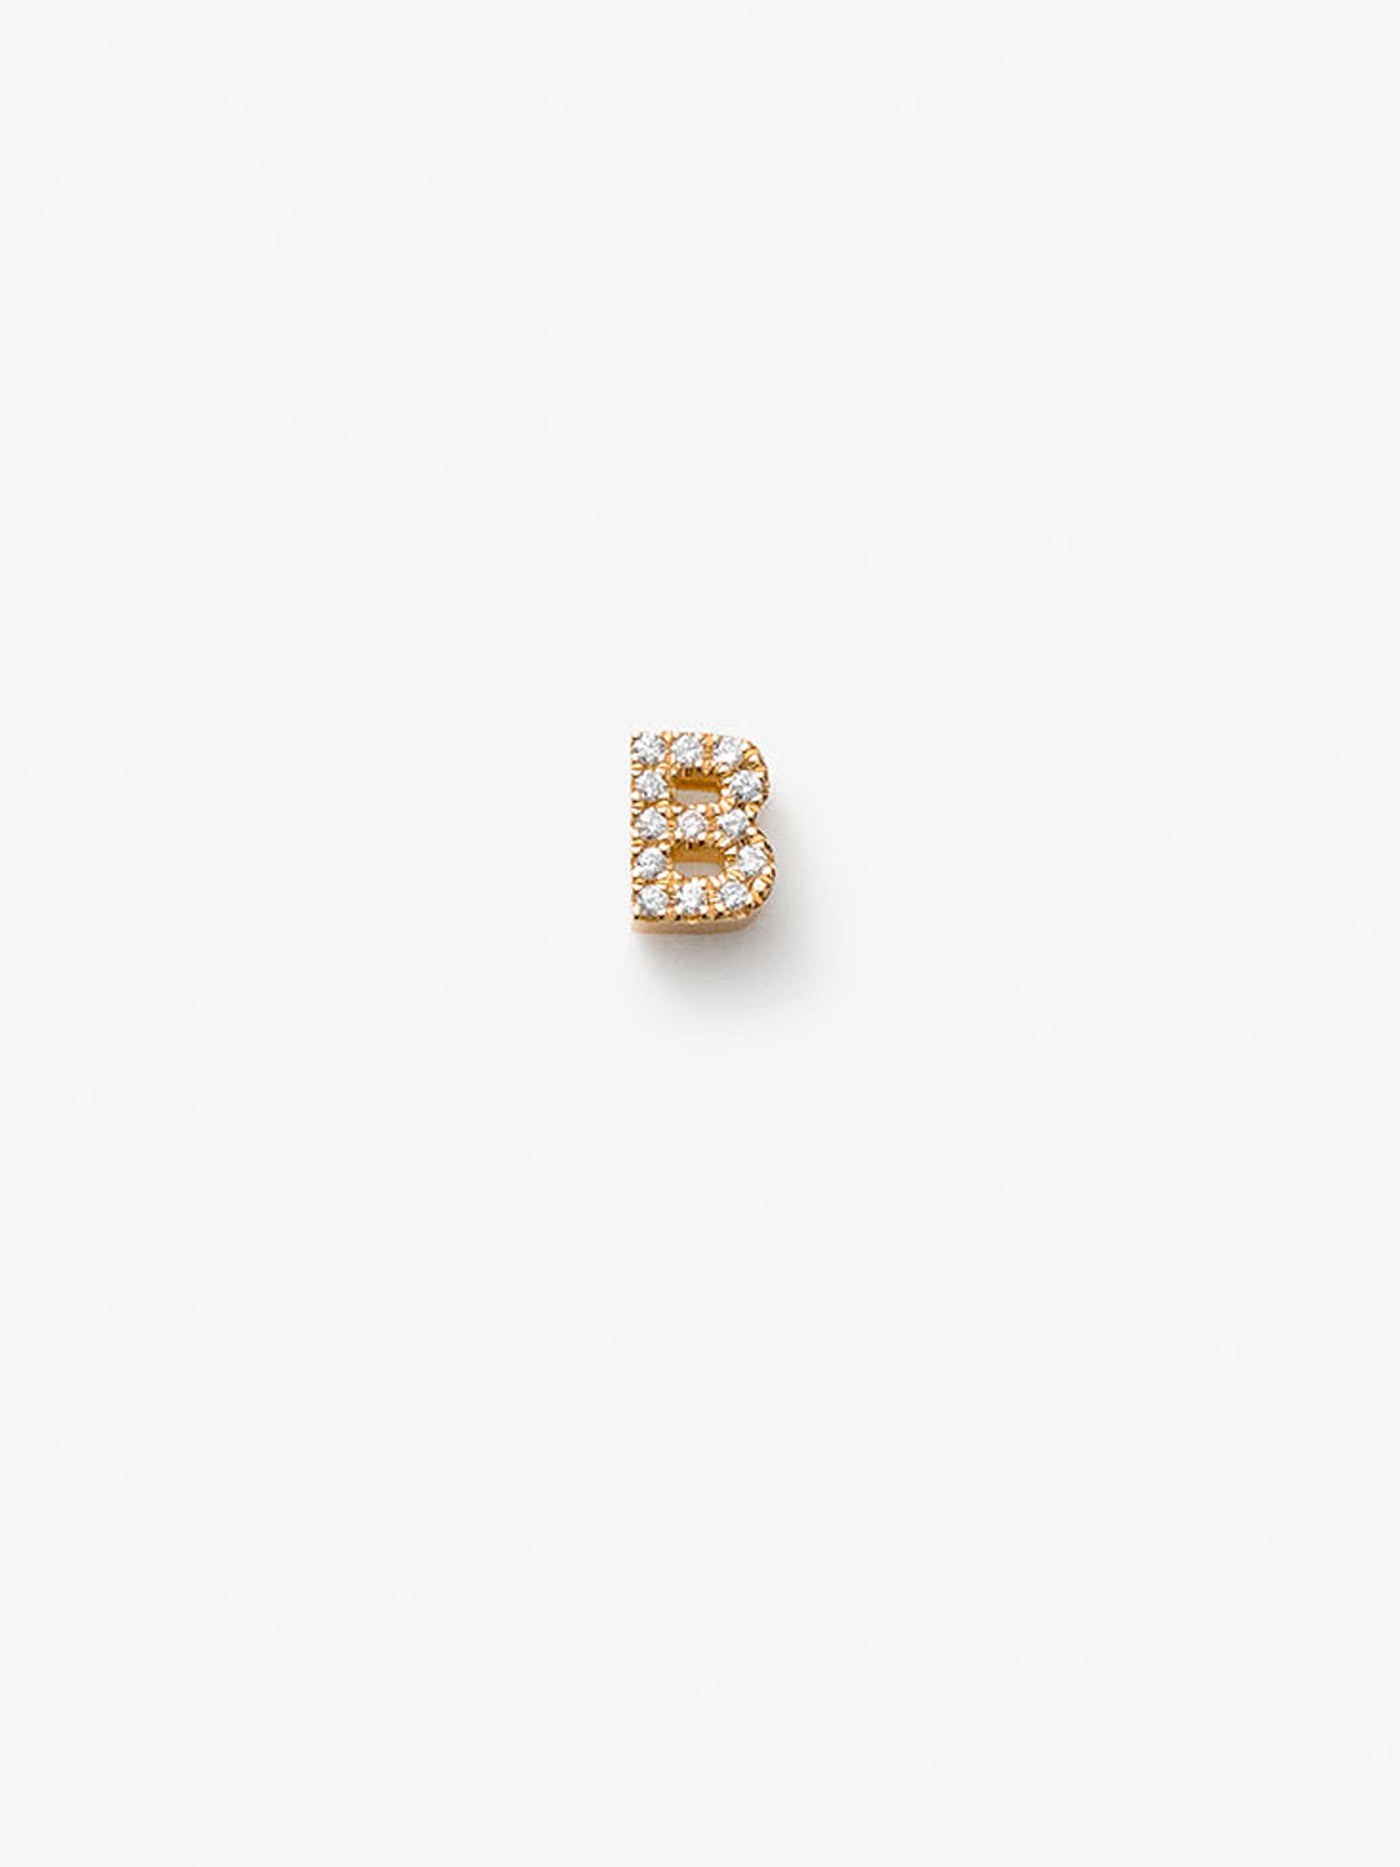 Letter B in Diamonds and 18k Gold